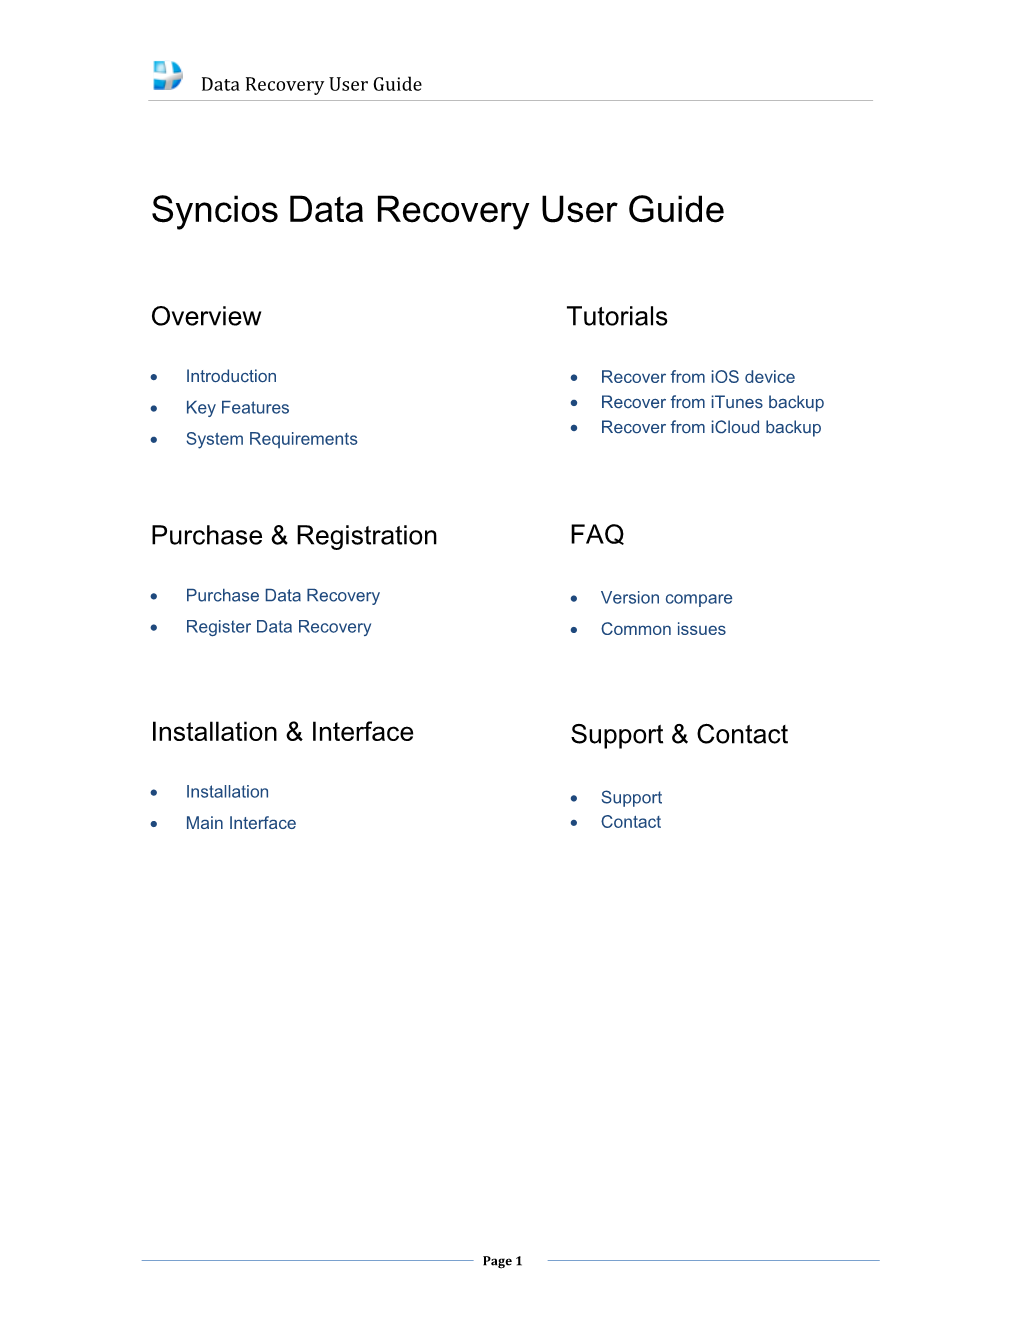 Syncios Data Recovery User Guide